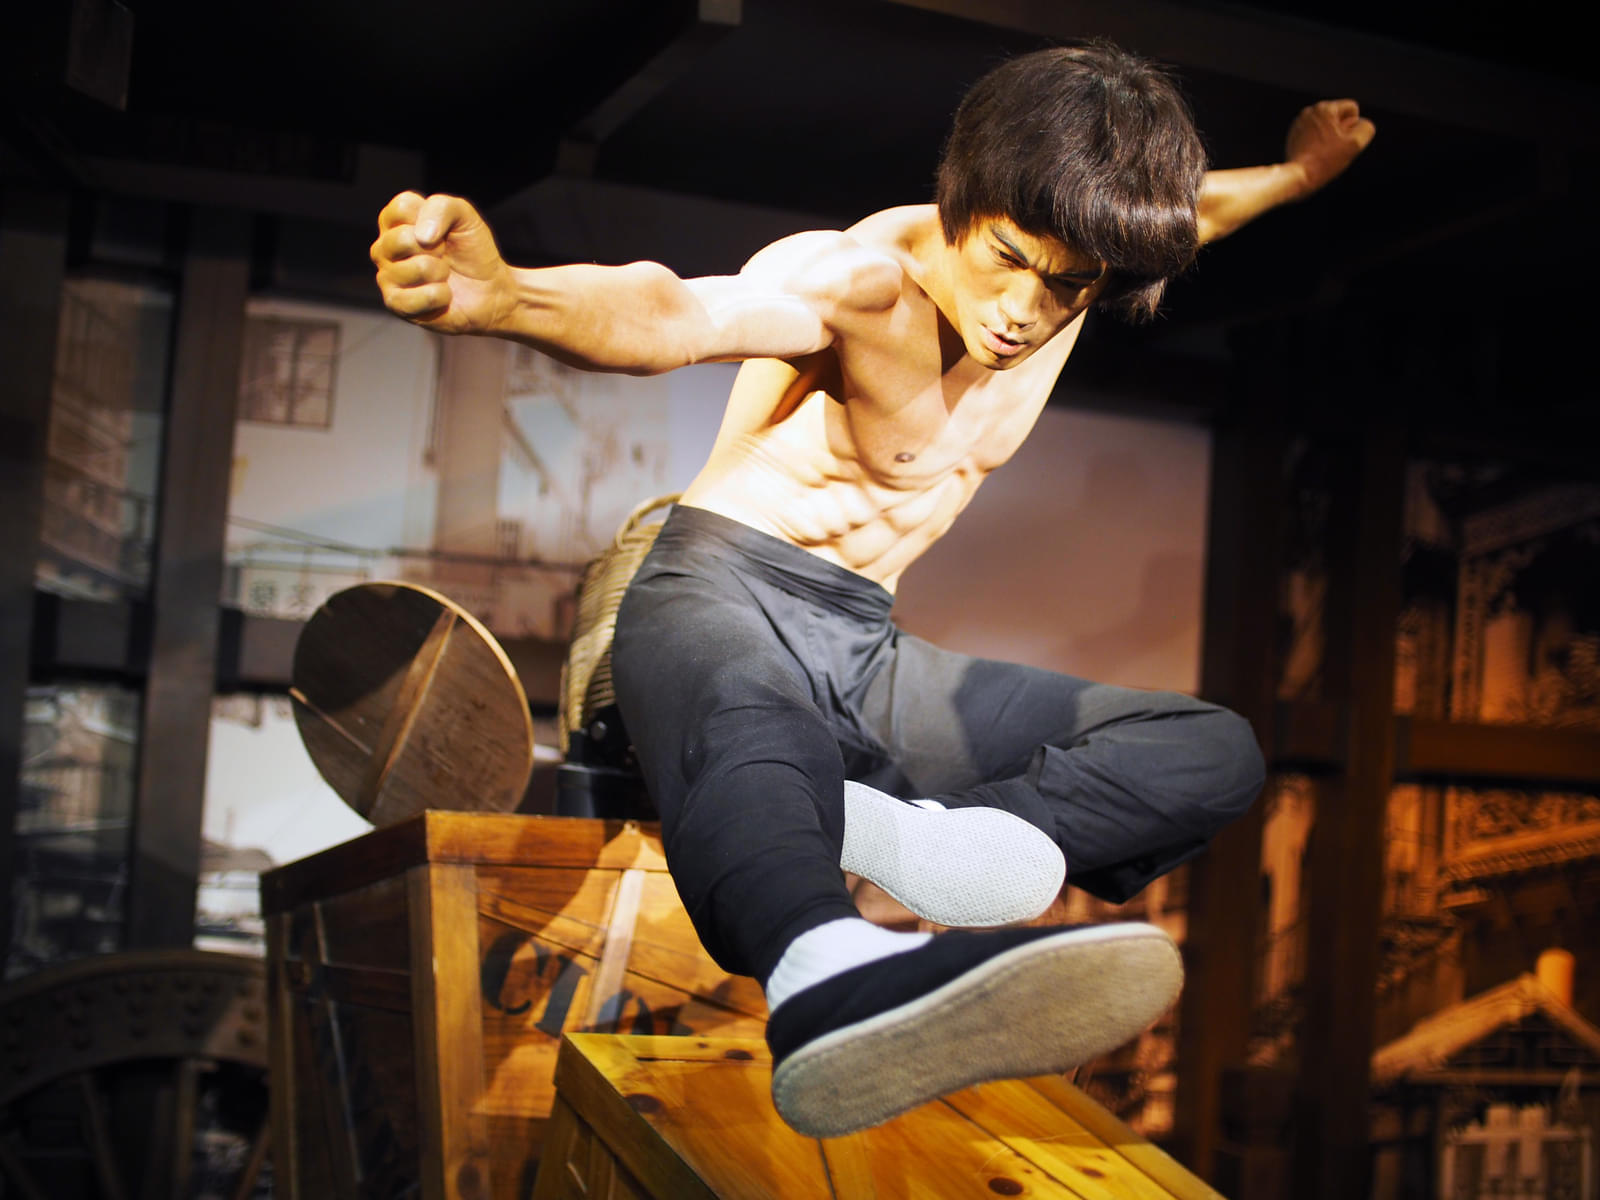 See Bruce Lee, the film star who popularised kung-fu globally at Madame Tussauds in Singapore